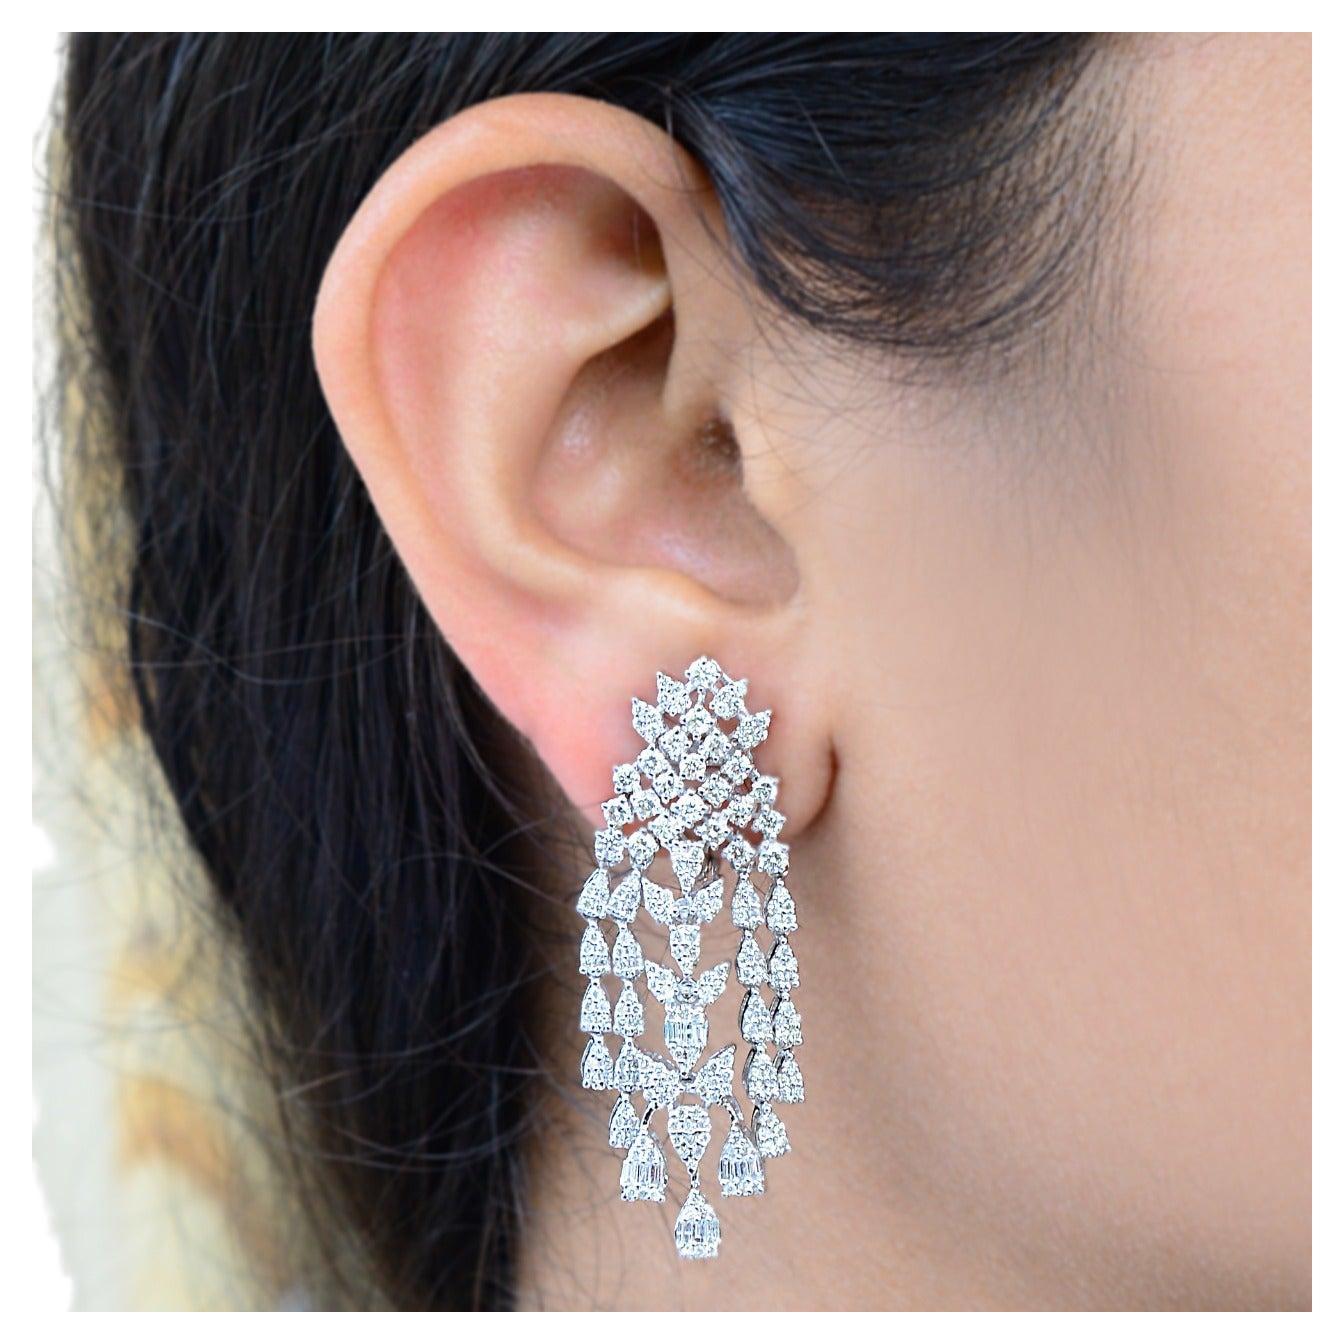 Item Code:- CN-40359
Gross Weight:- 18.71 gm
18k Solid White Gold Weight:- 17.99 gm
Natural Diamond Weight:- 3.60 ct. ( AVERAGE DIAMOND CLARITY SI1-SI2 & COLOR H-I )
Earrings Size:- 46 x 15 mm approx.

✦ Sizing
.....................
We can adjust